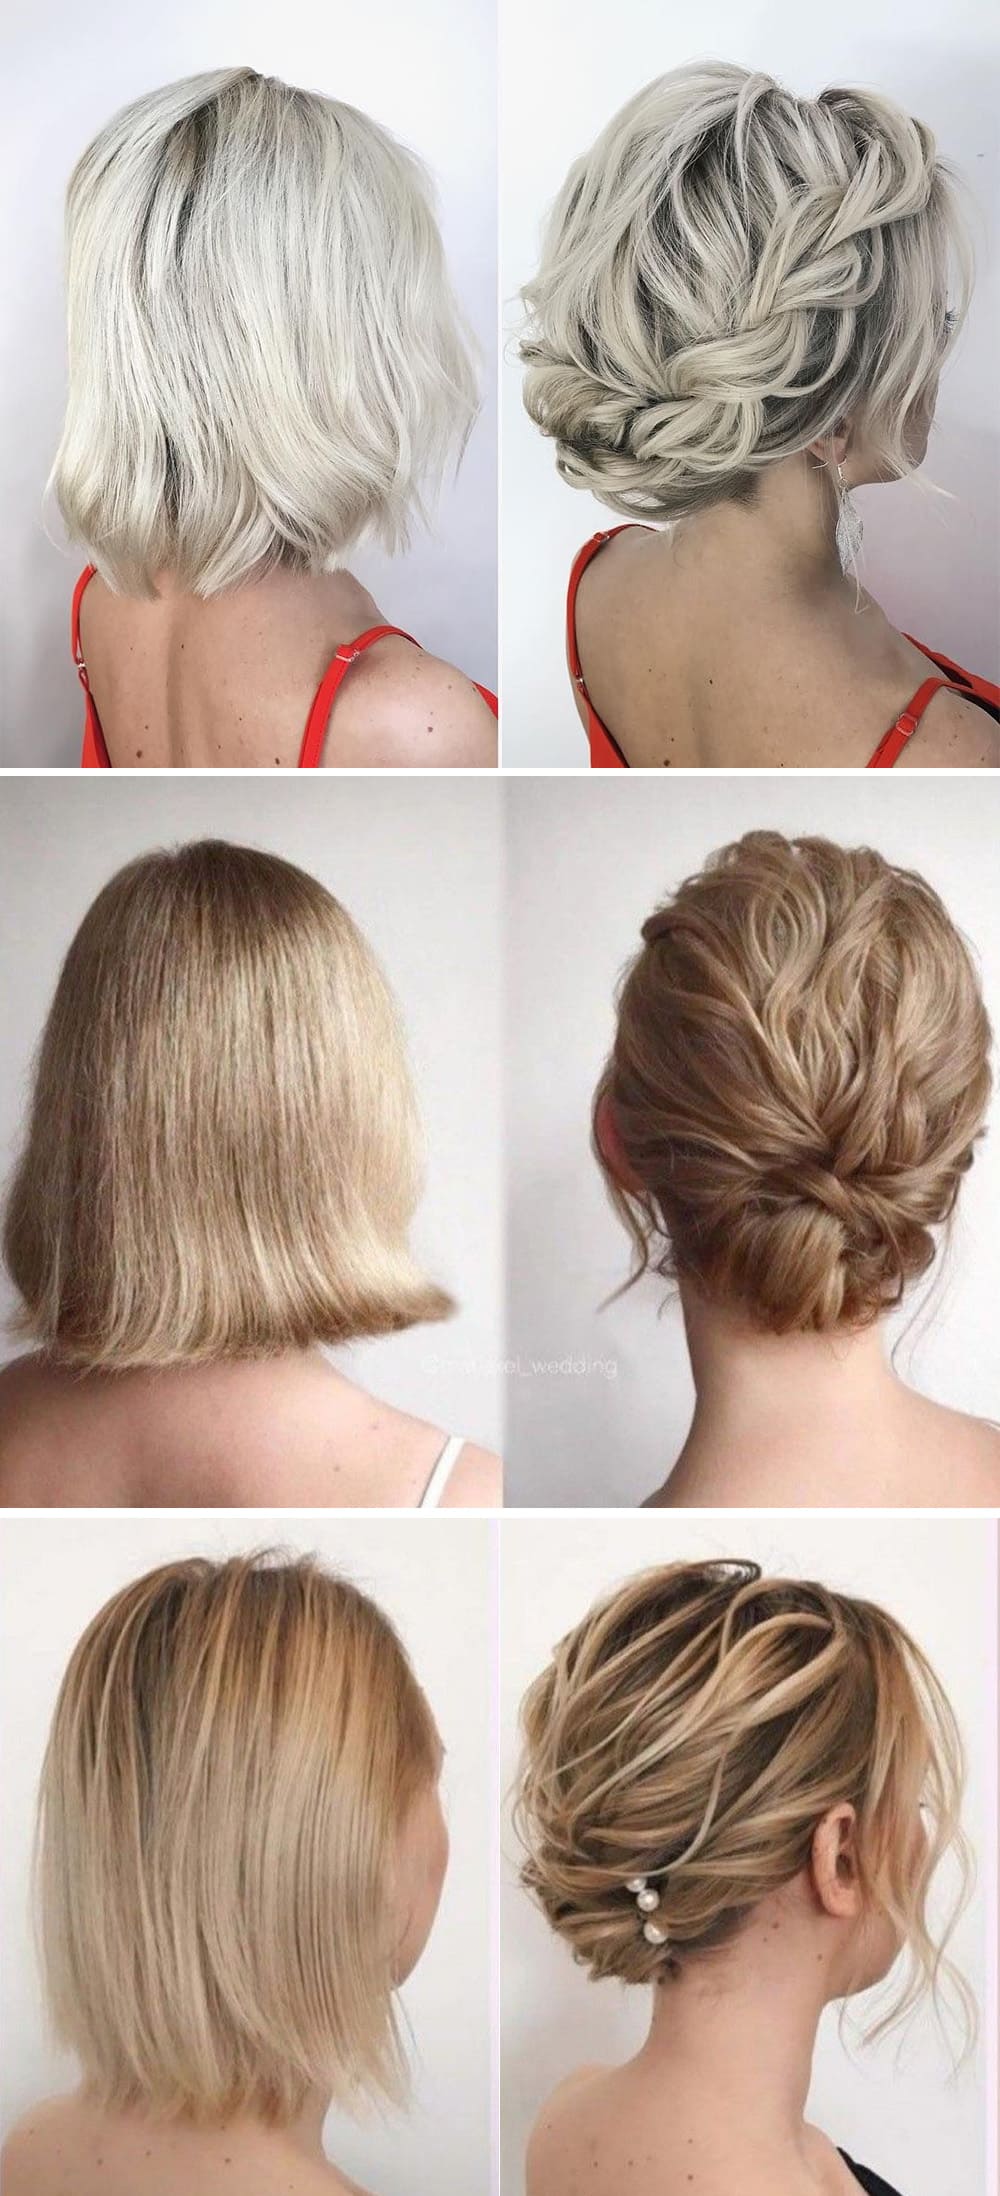 Bridal Hairstyles for Short Hair – Wedding Inspirations 2020 - JJ's House